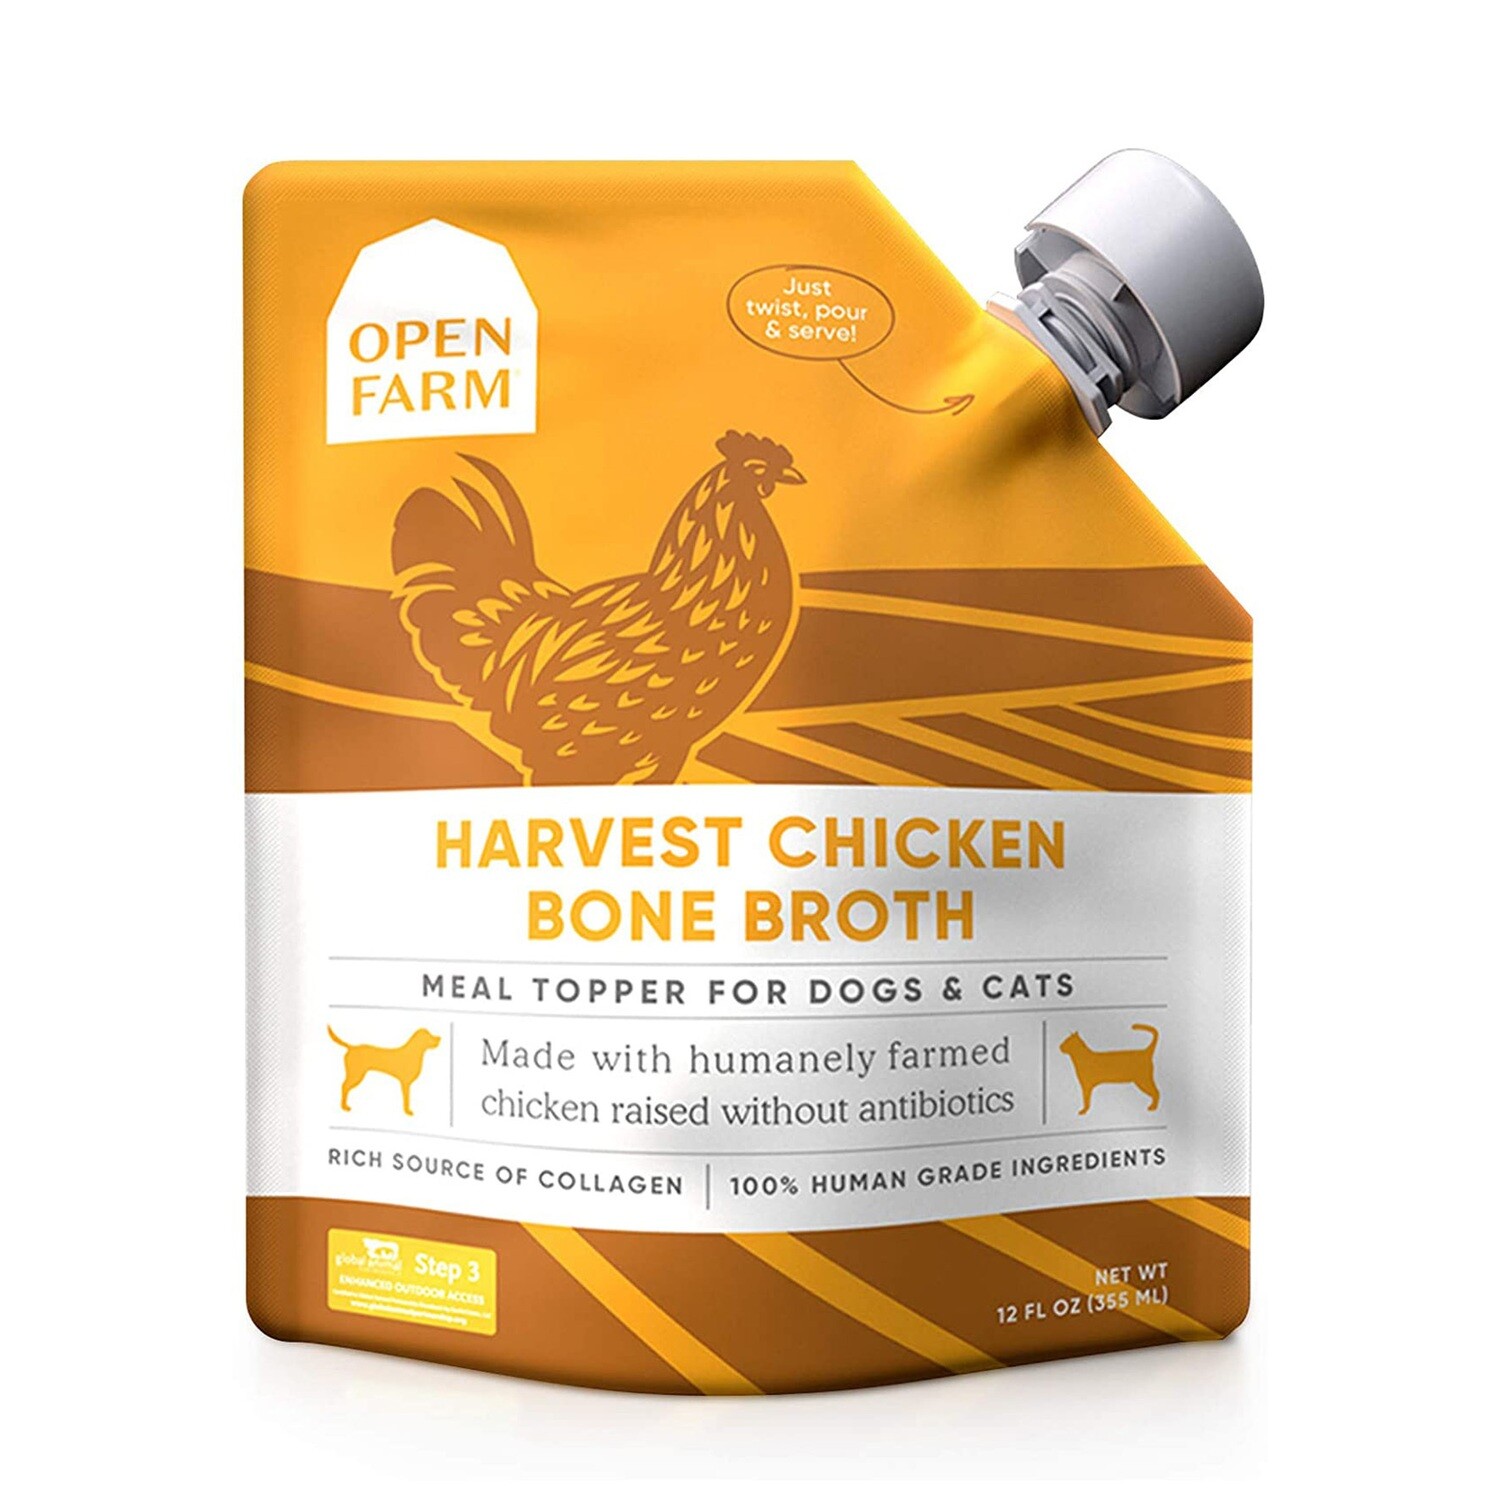 Open Farm Harvest Chicken Bone Broth for Dogs and Cats-12oz